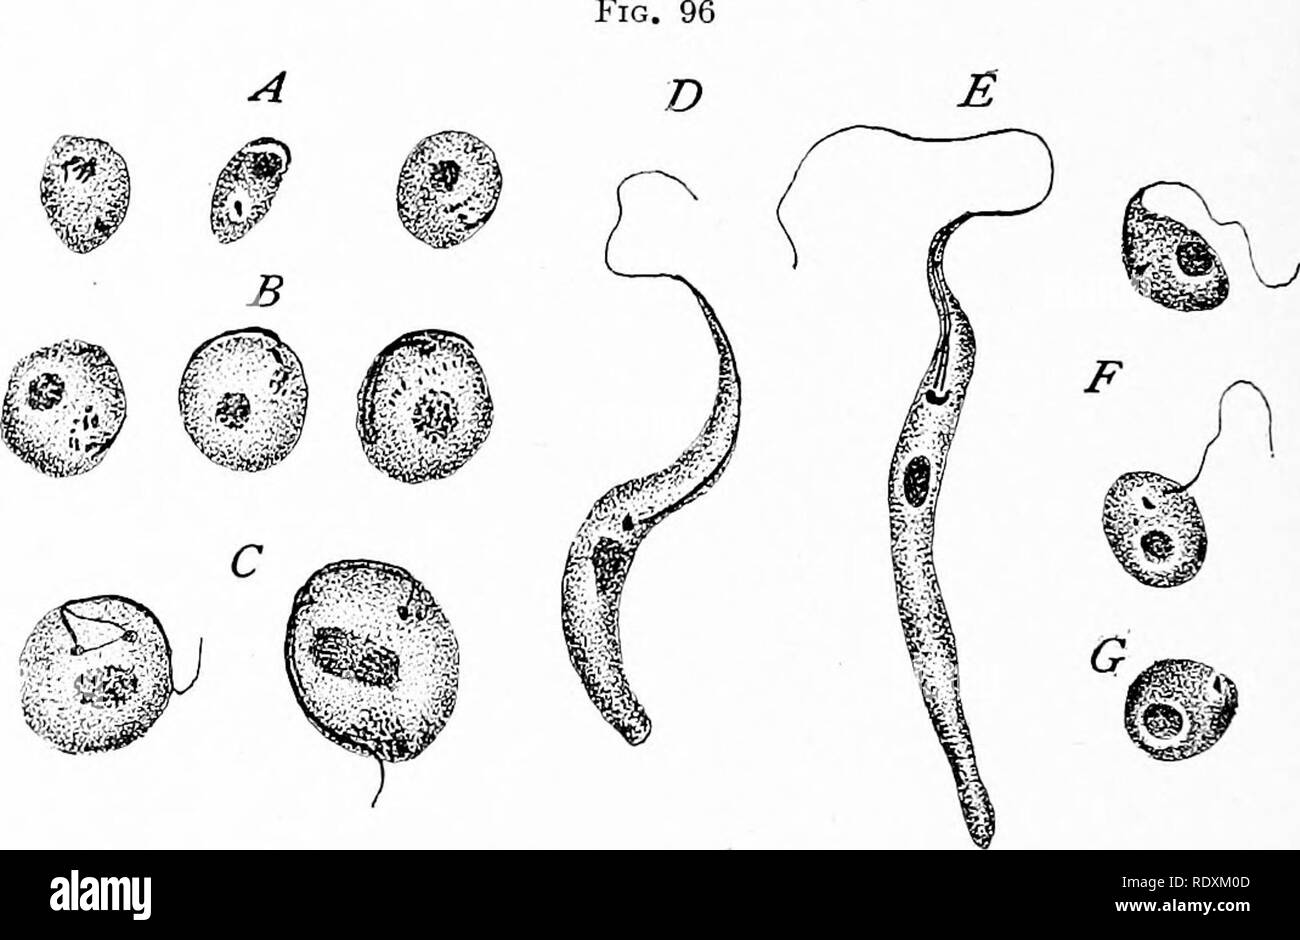 . Protozoo?logy. Protozoa; Protozoa, Pathogenic. 242 THE PATHOGENIC FLAGELLATES withdrawal of the flagellum. This gradually shortens and disappears, a rhizoblast remaining for some time; but this too is ultimately absorbed, and as a &quot;gregarine&quot; form the minute organism makes its way to epithelial cells, where it becomes attached (Fig. 93). Since Leger's original observations several others have worked upon different species of crithidia, the most recent results being obtained by Patton ('08) in connection with a species {Cr. gerridis, Patton) from a water bug, Gerris fossarum, and by Stock Photo